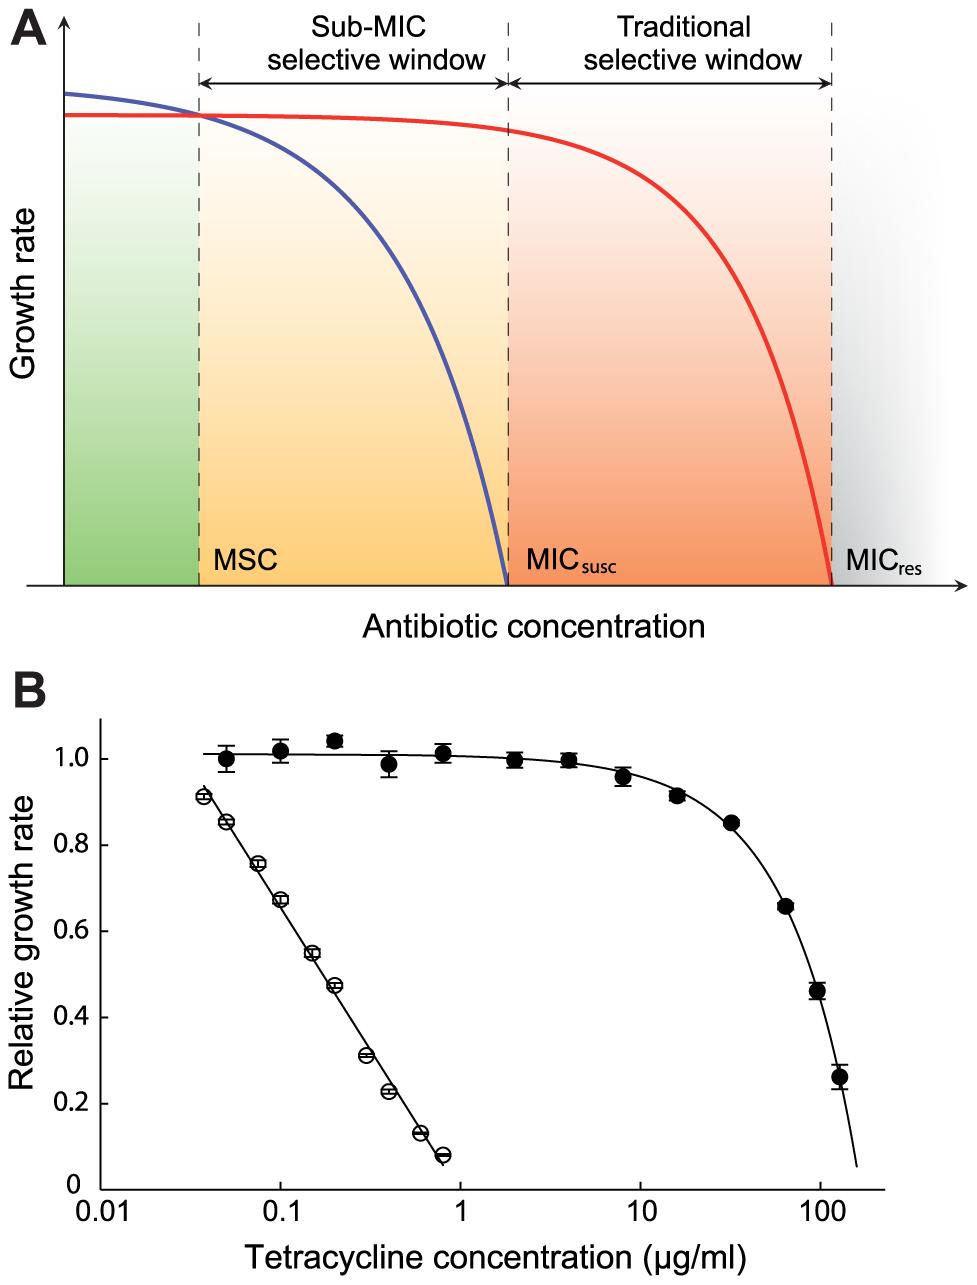 18 Figure 9. Growth rates of antibiotic resistance as a function of antibiotic concentrations (Gullberg et al.